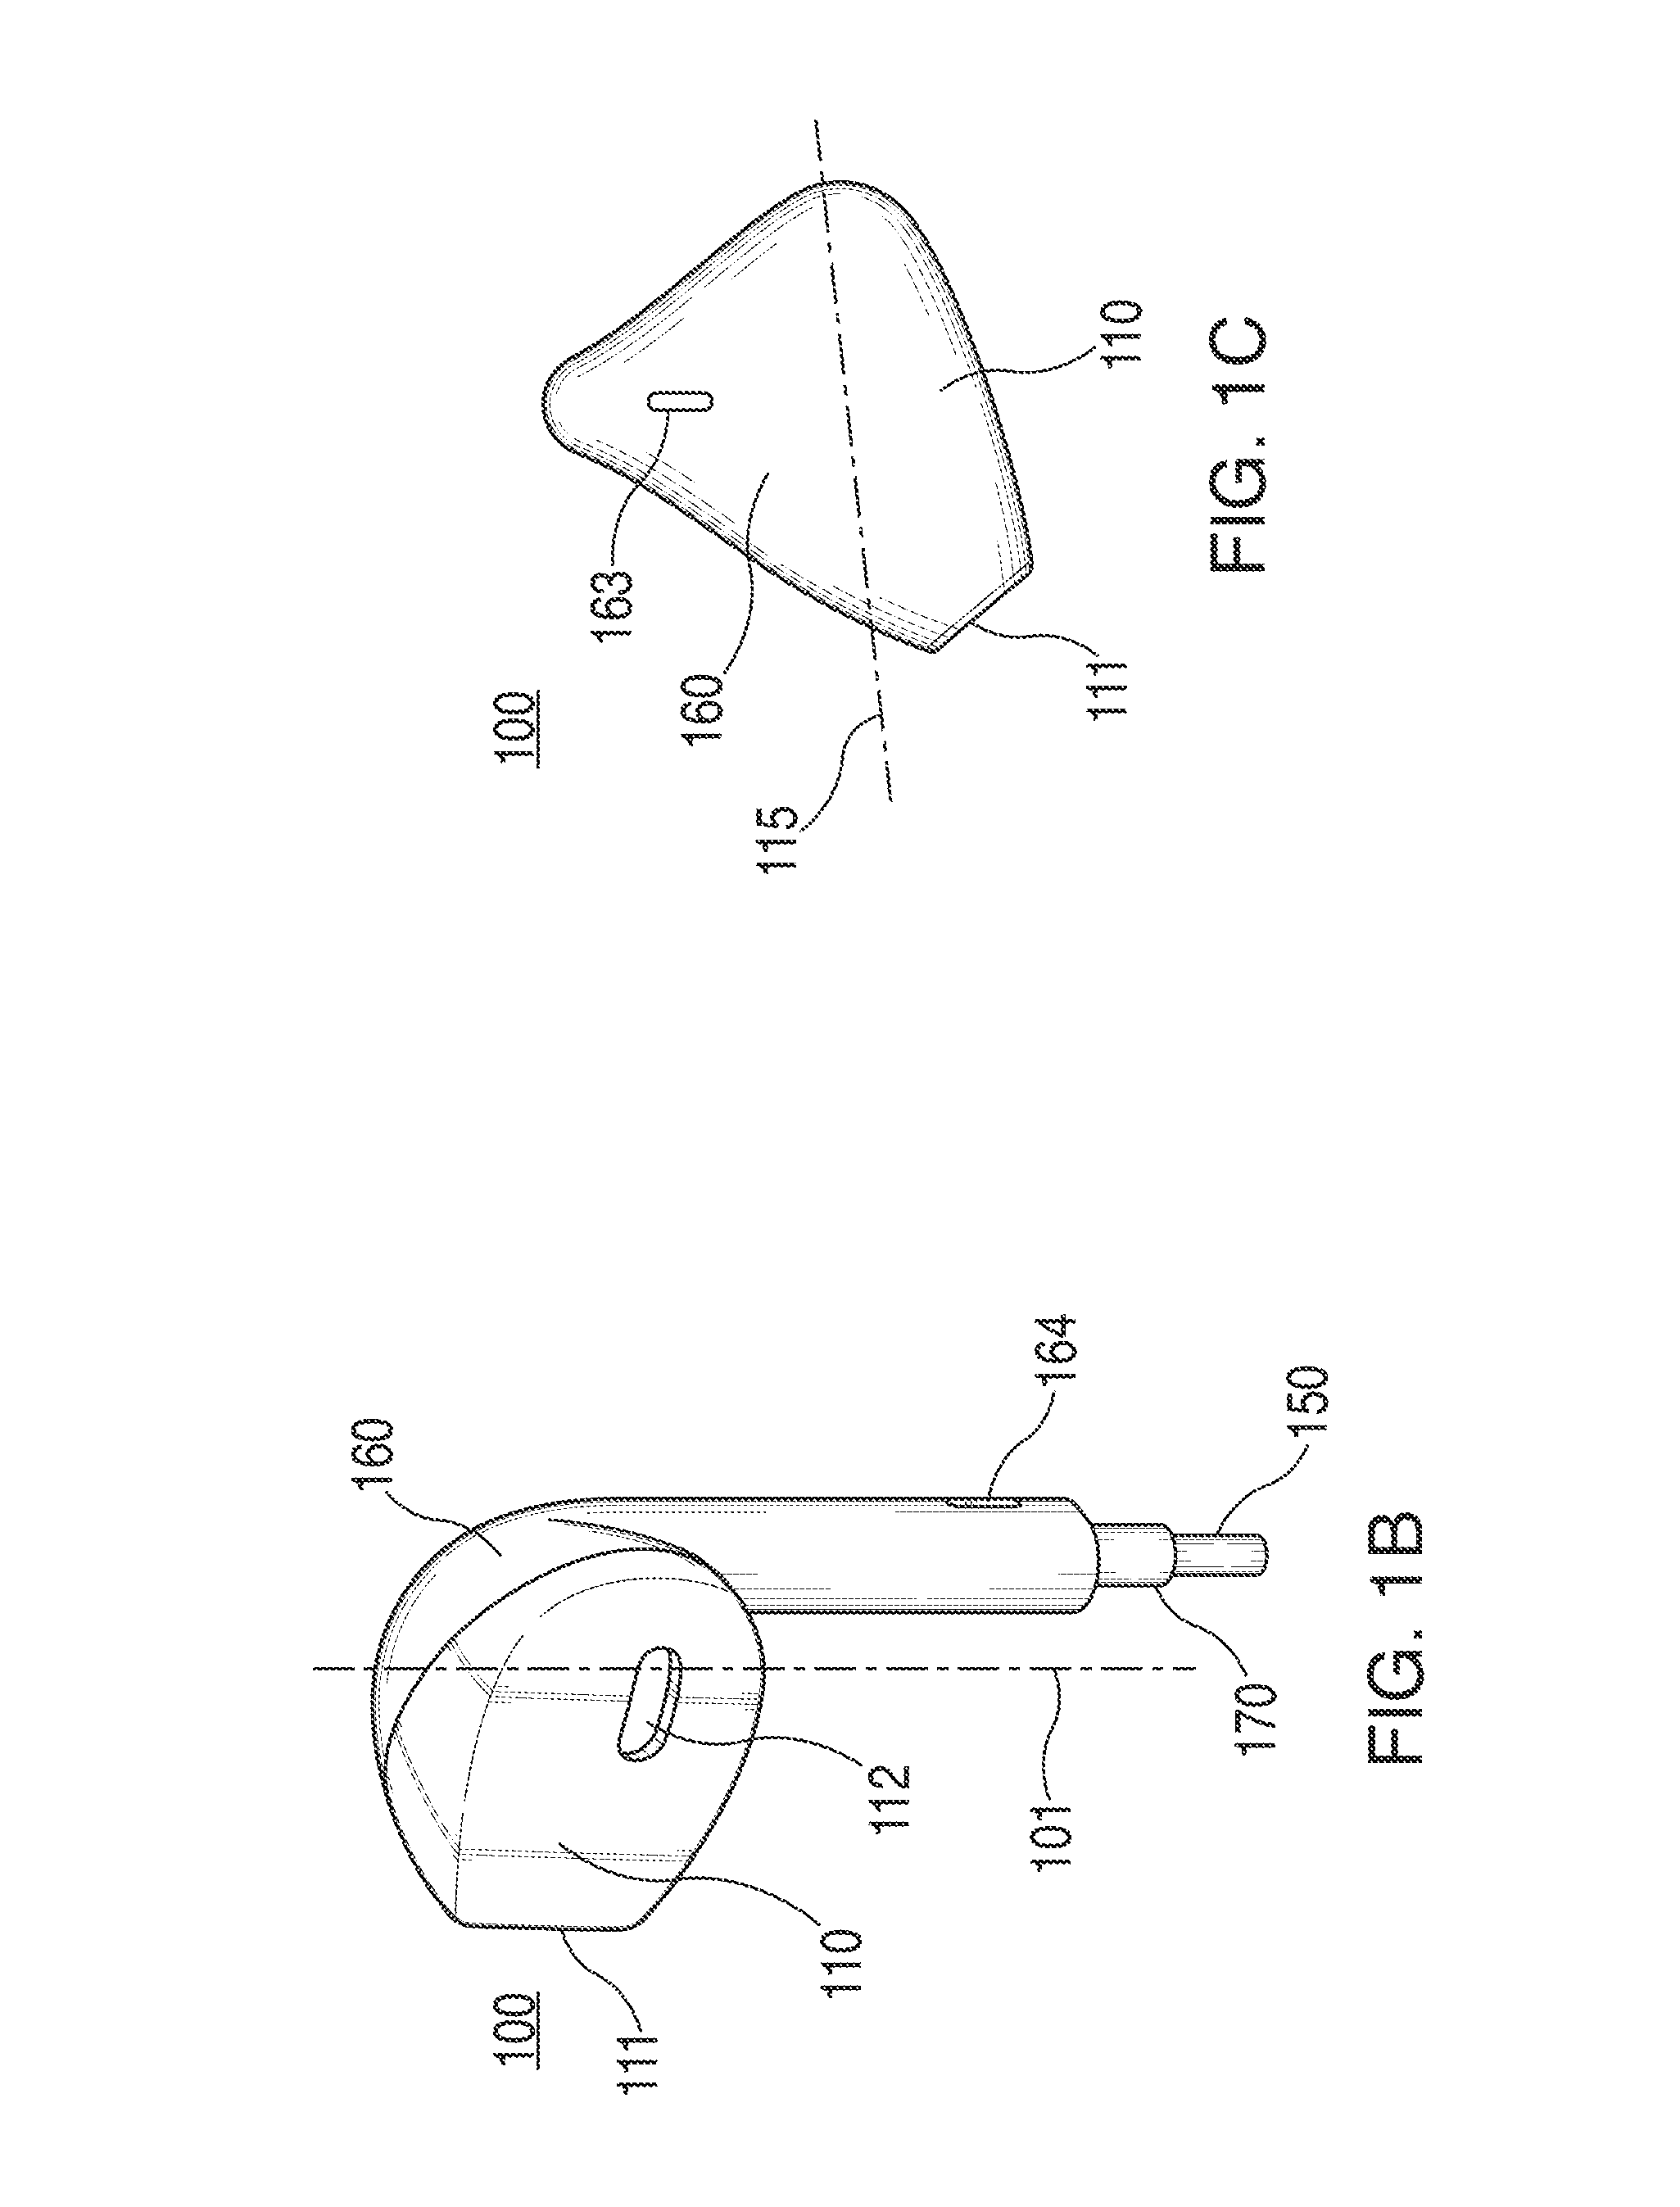 Systems and methods for assembling non-occluding earbuds